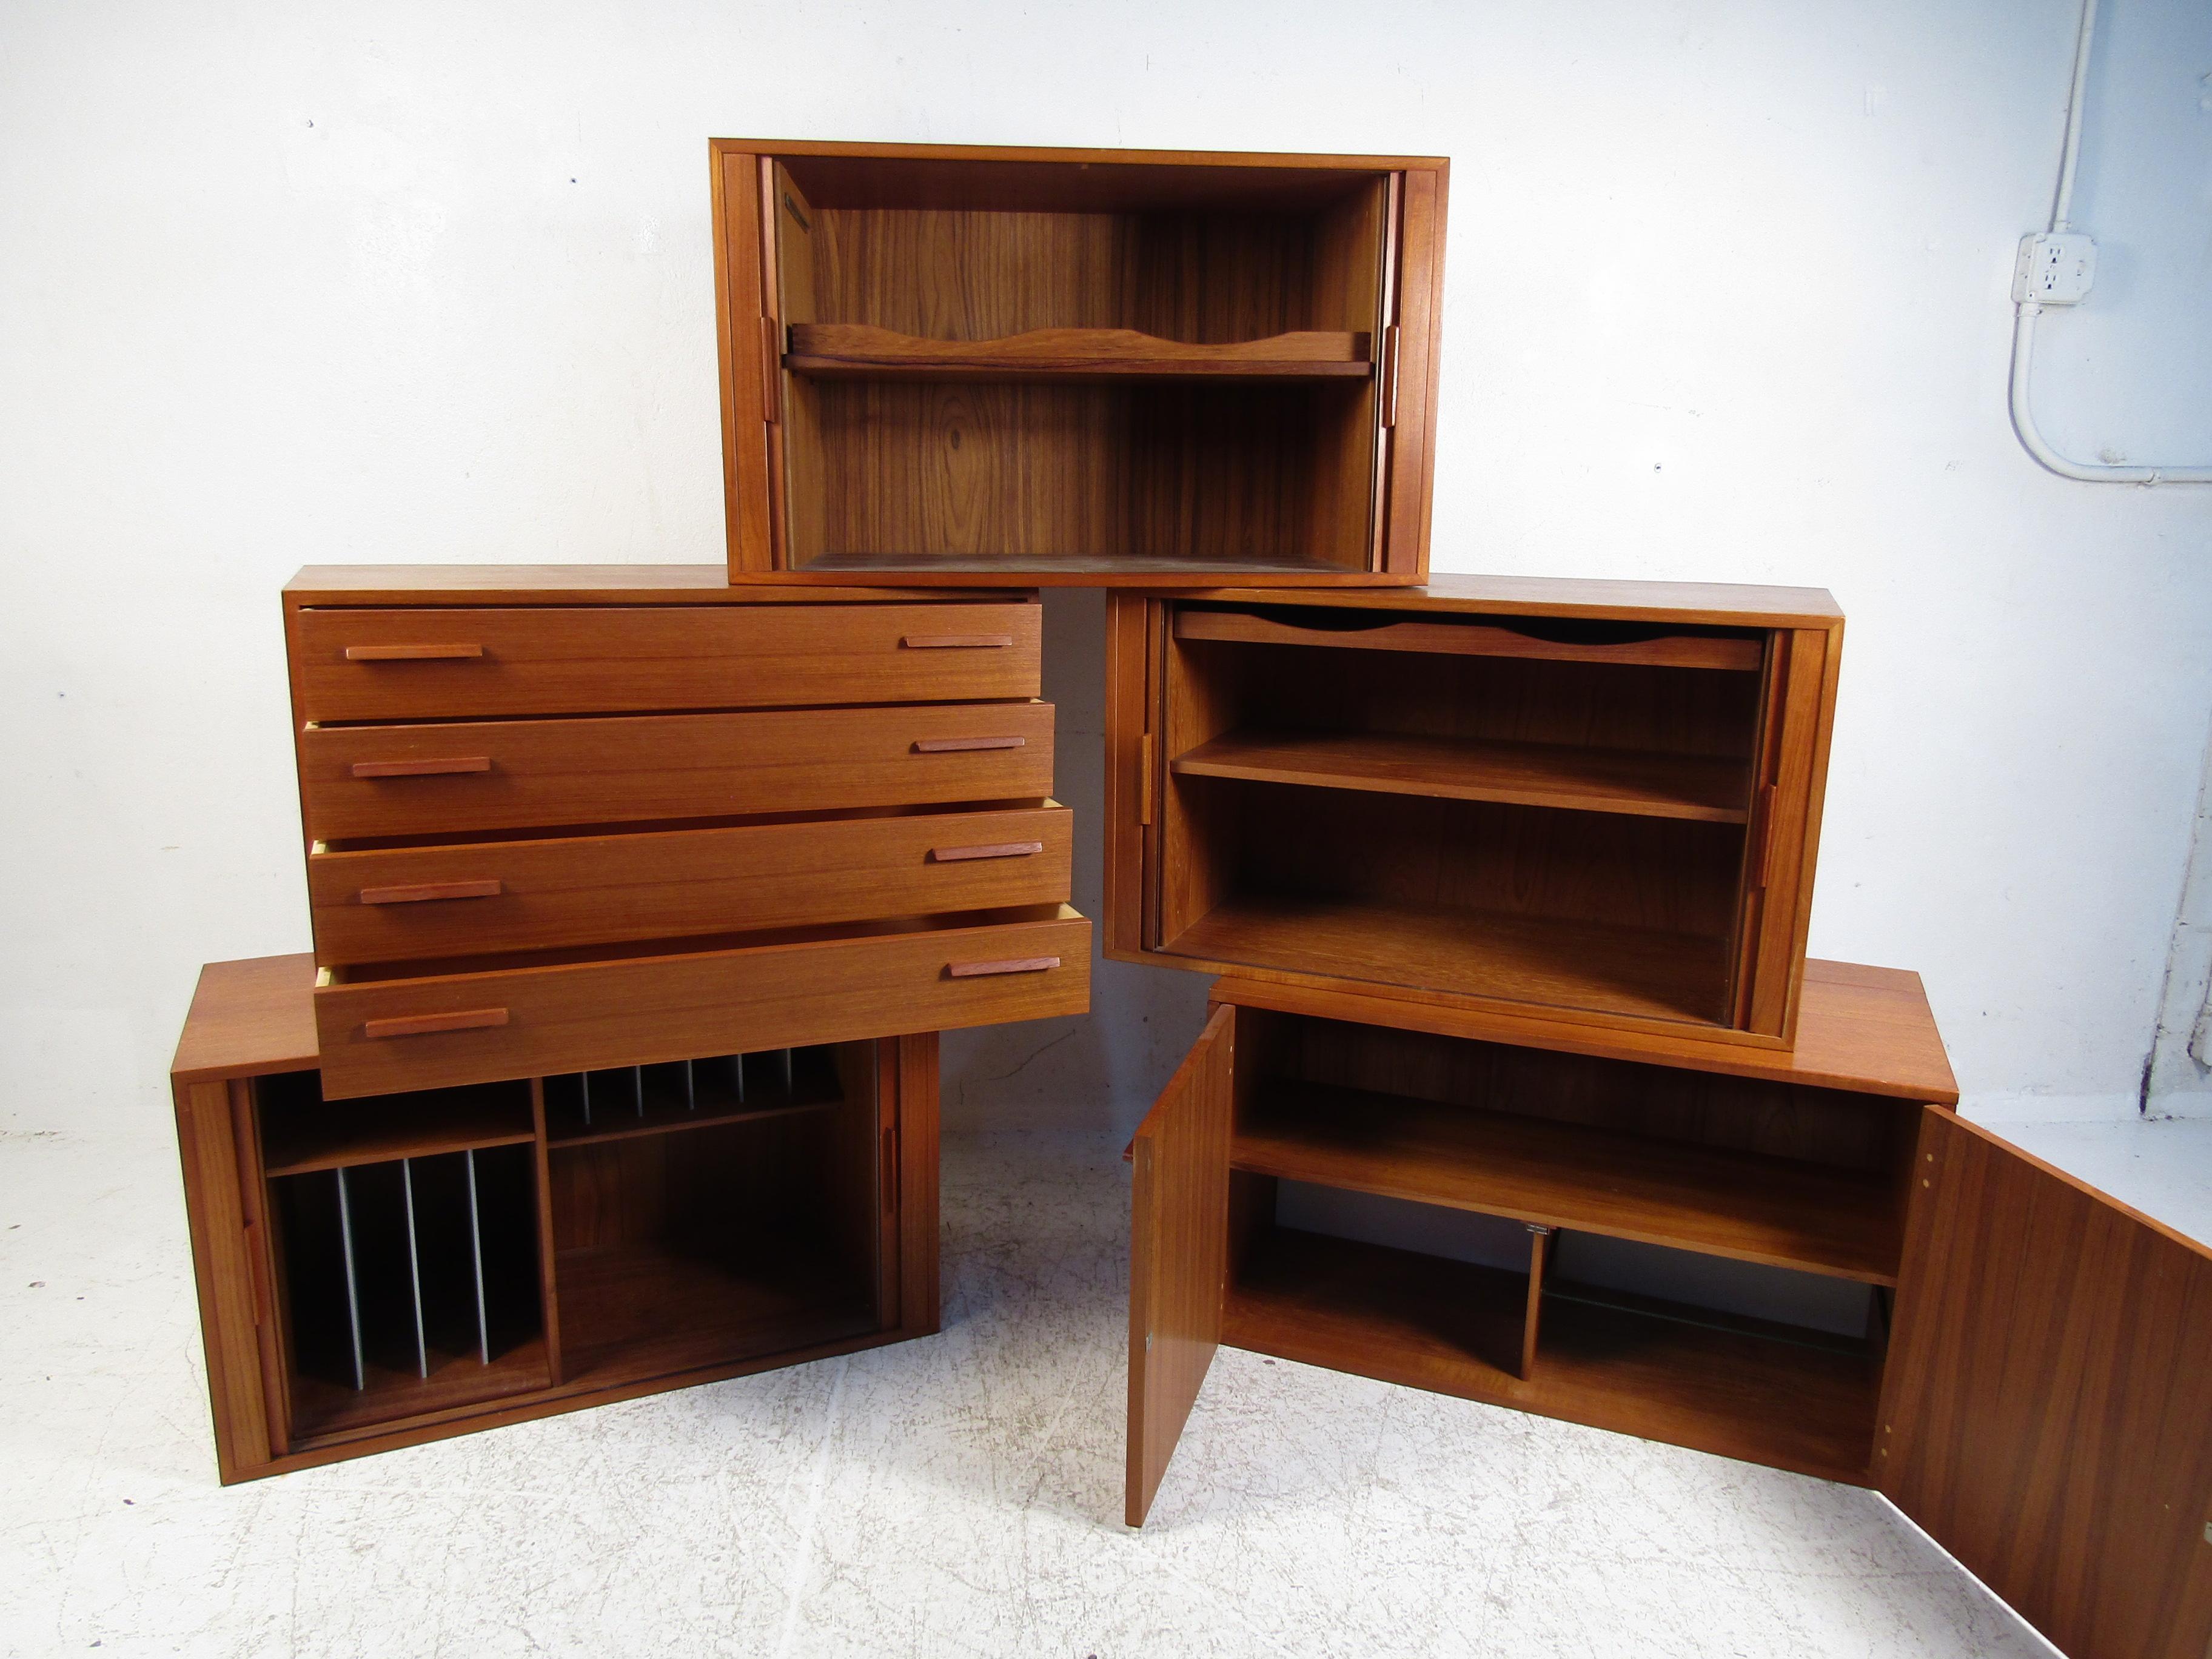 Unusual Danish modern wall-mounted cabinets. 5 pieces in total. Bracket mounts are on the backside of each cabinet. Can be set up in your home in a variety of ways. Please confirm item location with dealer (NJ or NY).